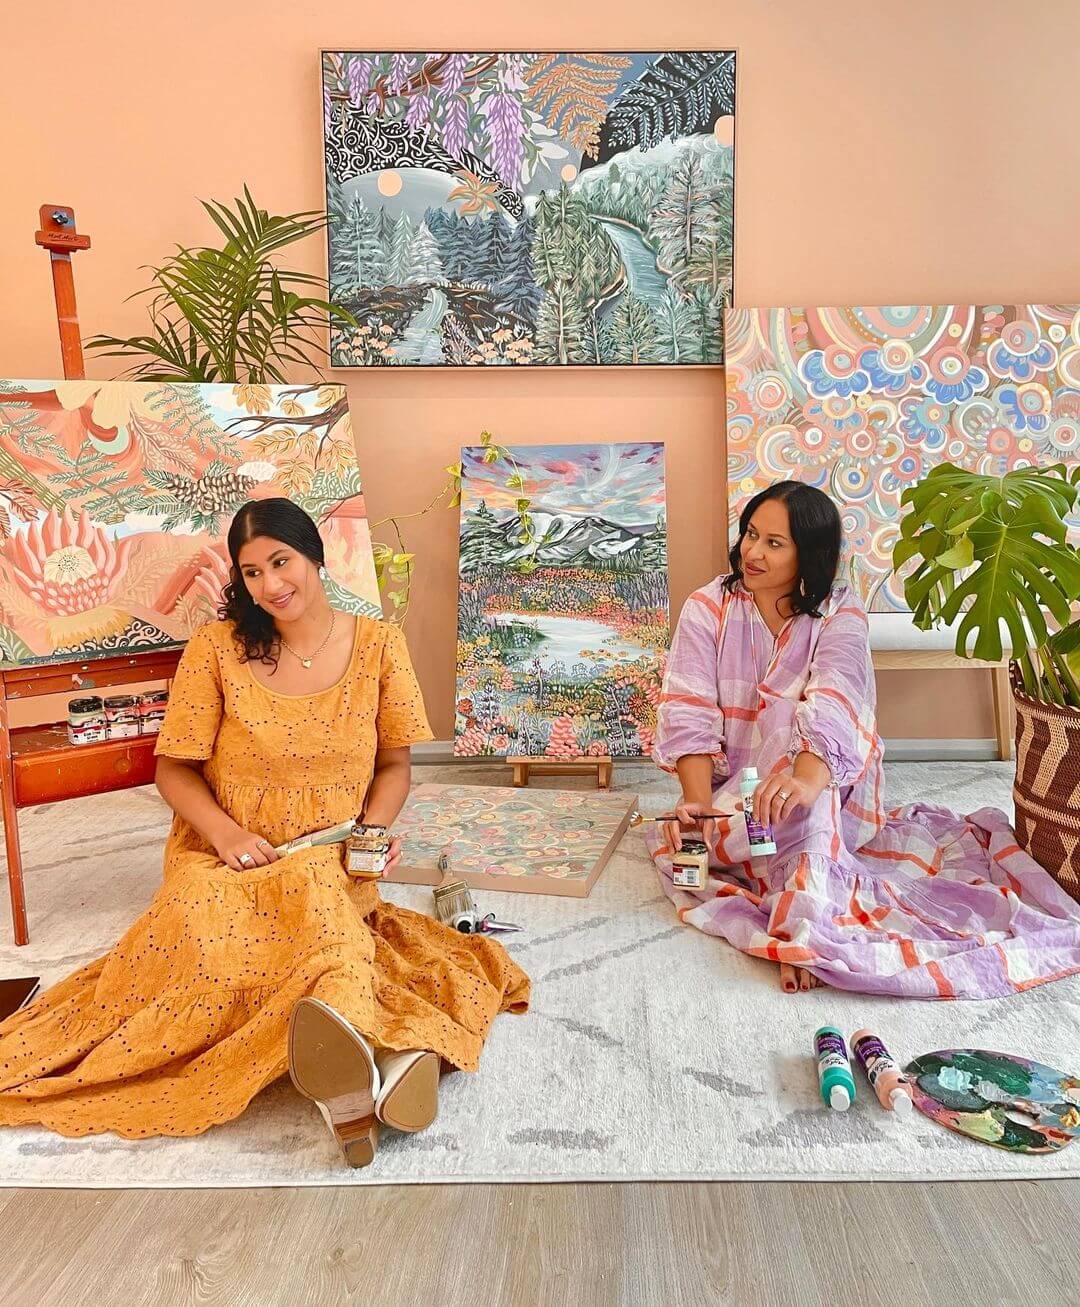 Lani and Zara sitting on the ground of their studio with colourful artworks hanging on the wall behind and on an easel with paints behind them.